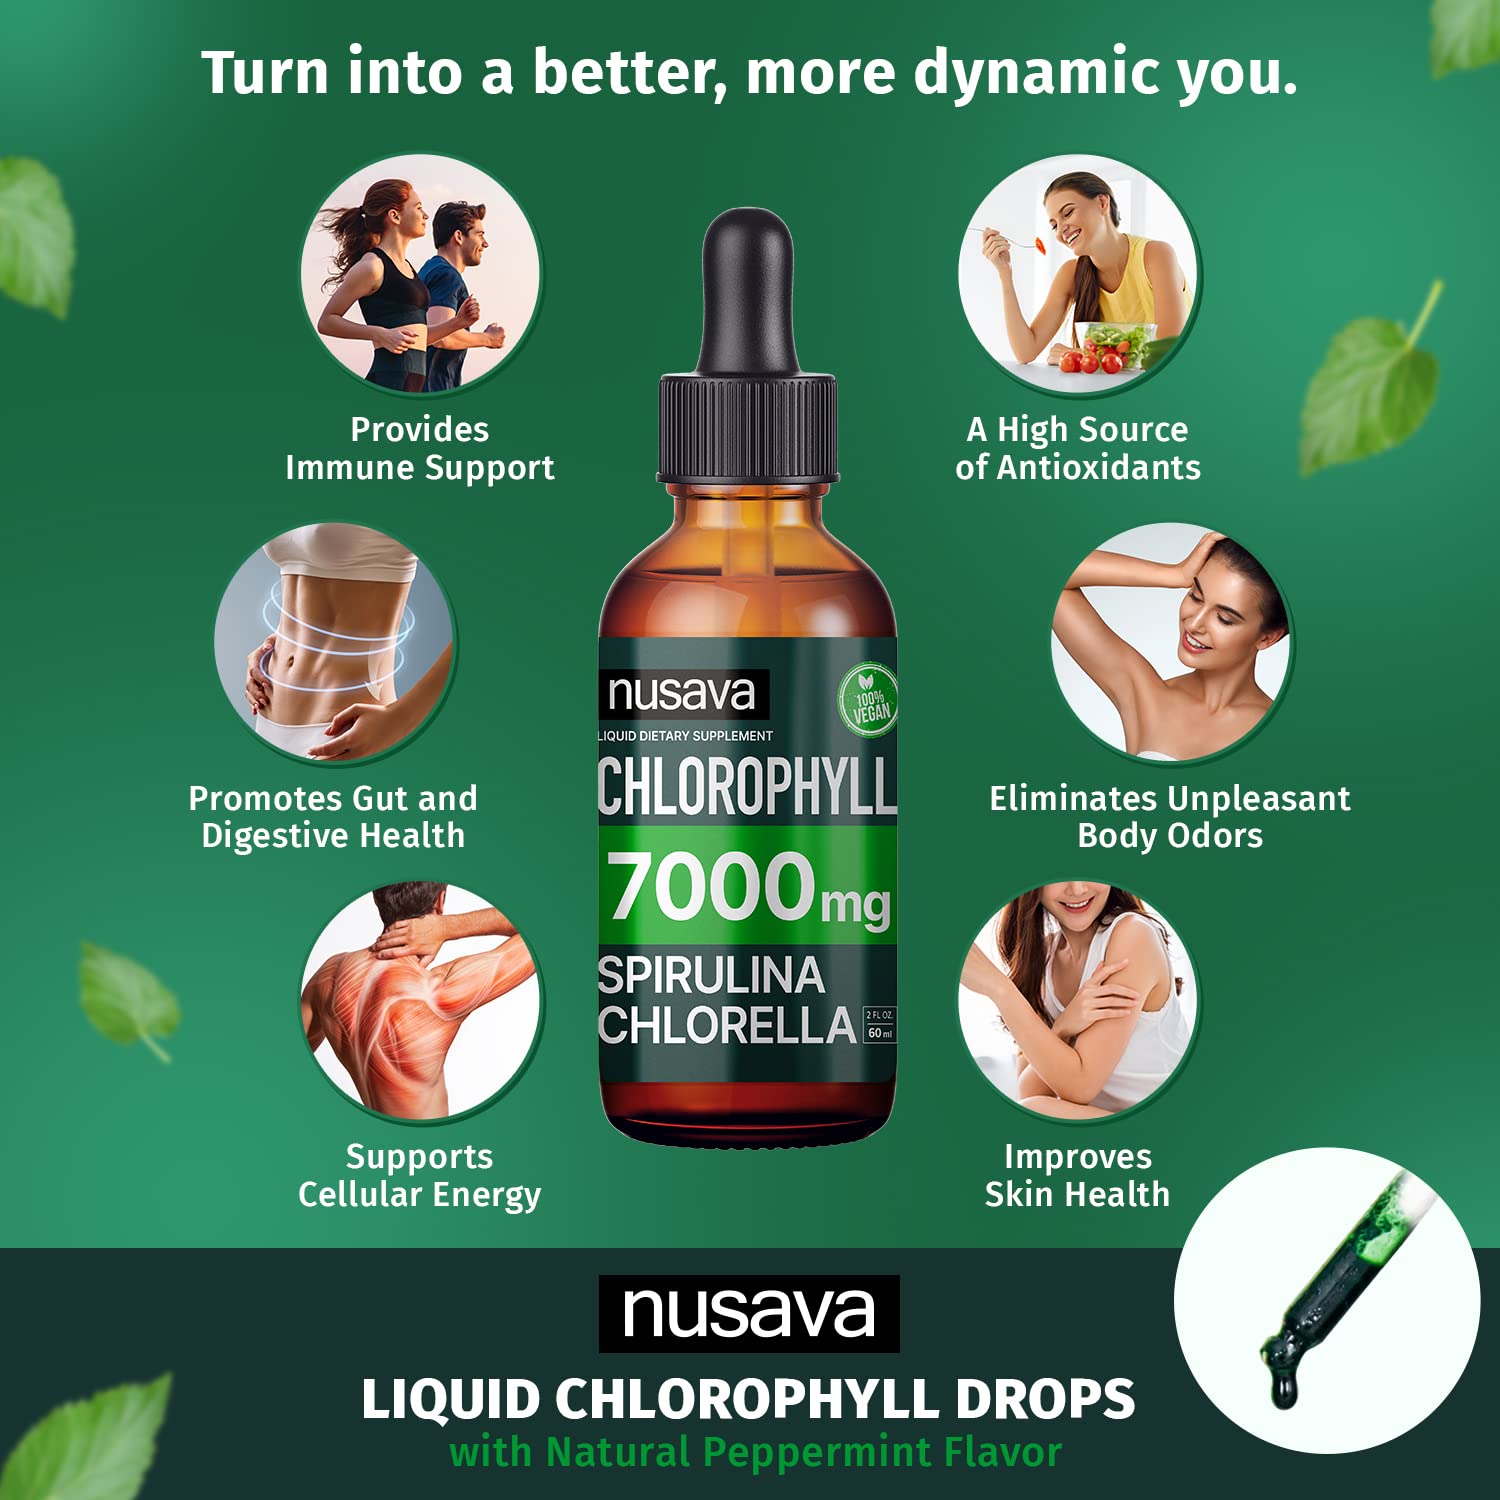 NUSAVA Unflavored D3 K2 Drops and Chlorophyll Liquid Drops Bundle - Potent Liquid Vitamins for Heart, Joint, Energy, & Immune Support - Non-GMO, Gluten-Free, 2pk Each